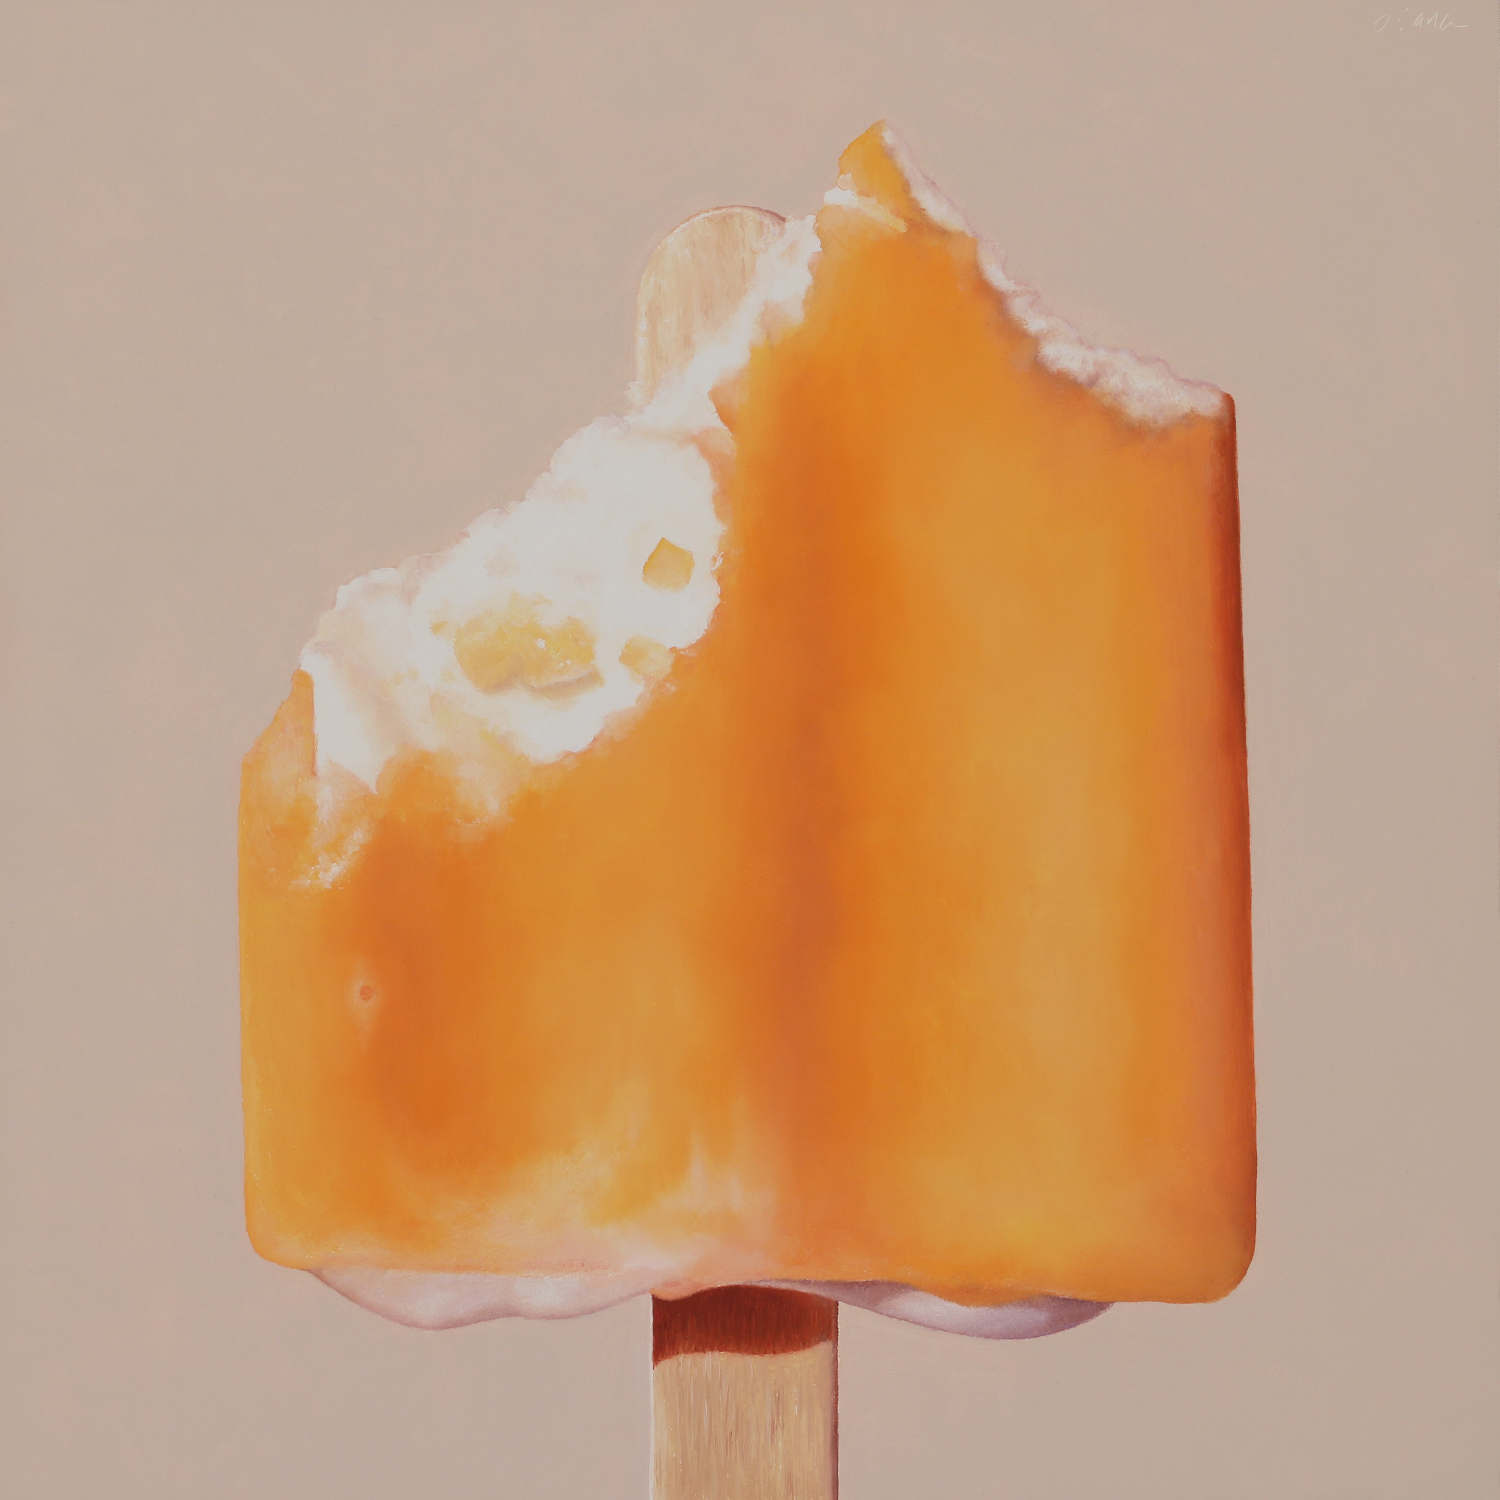  Creamsicle  oil on panel / 12 x 12 inches  SOLD 